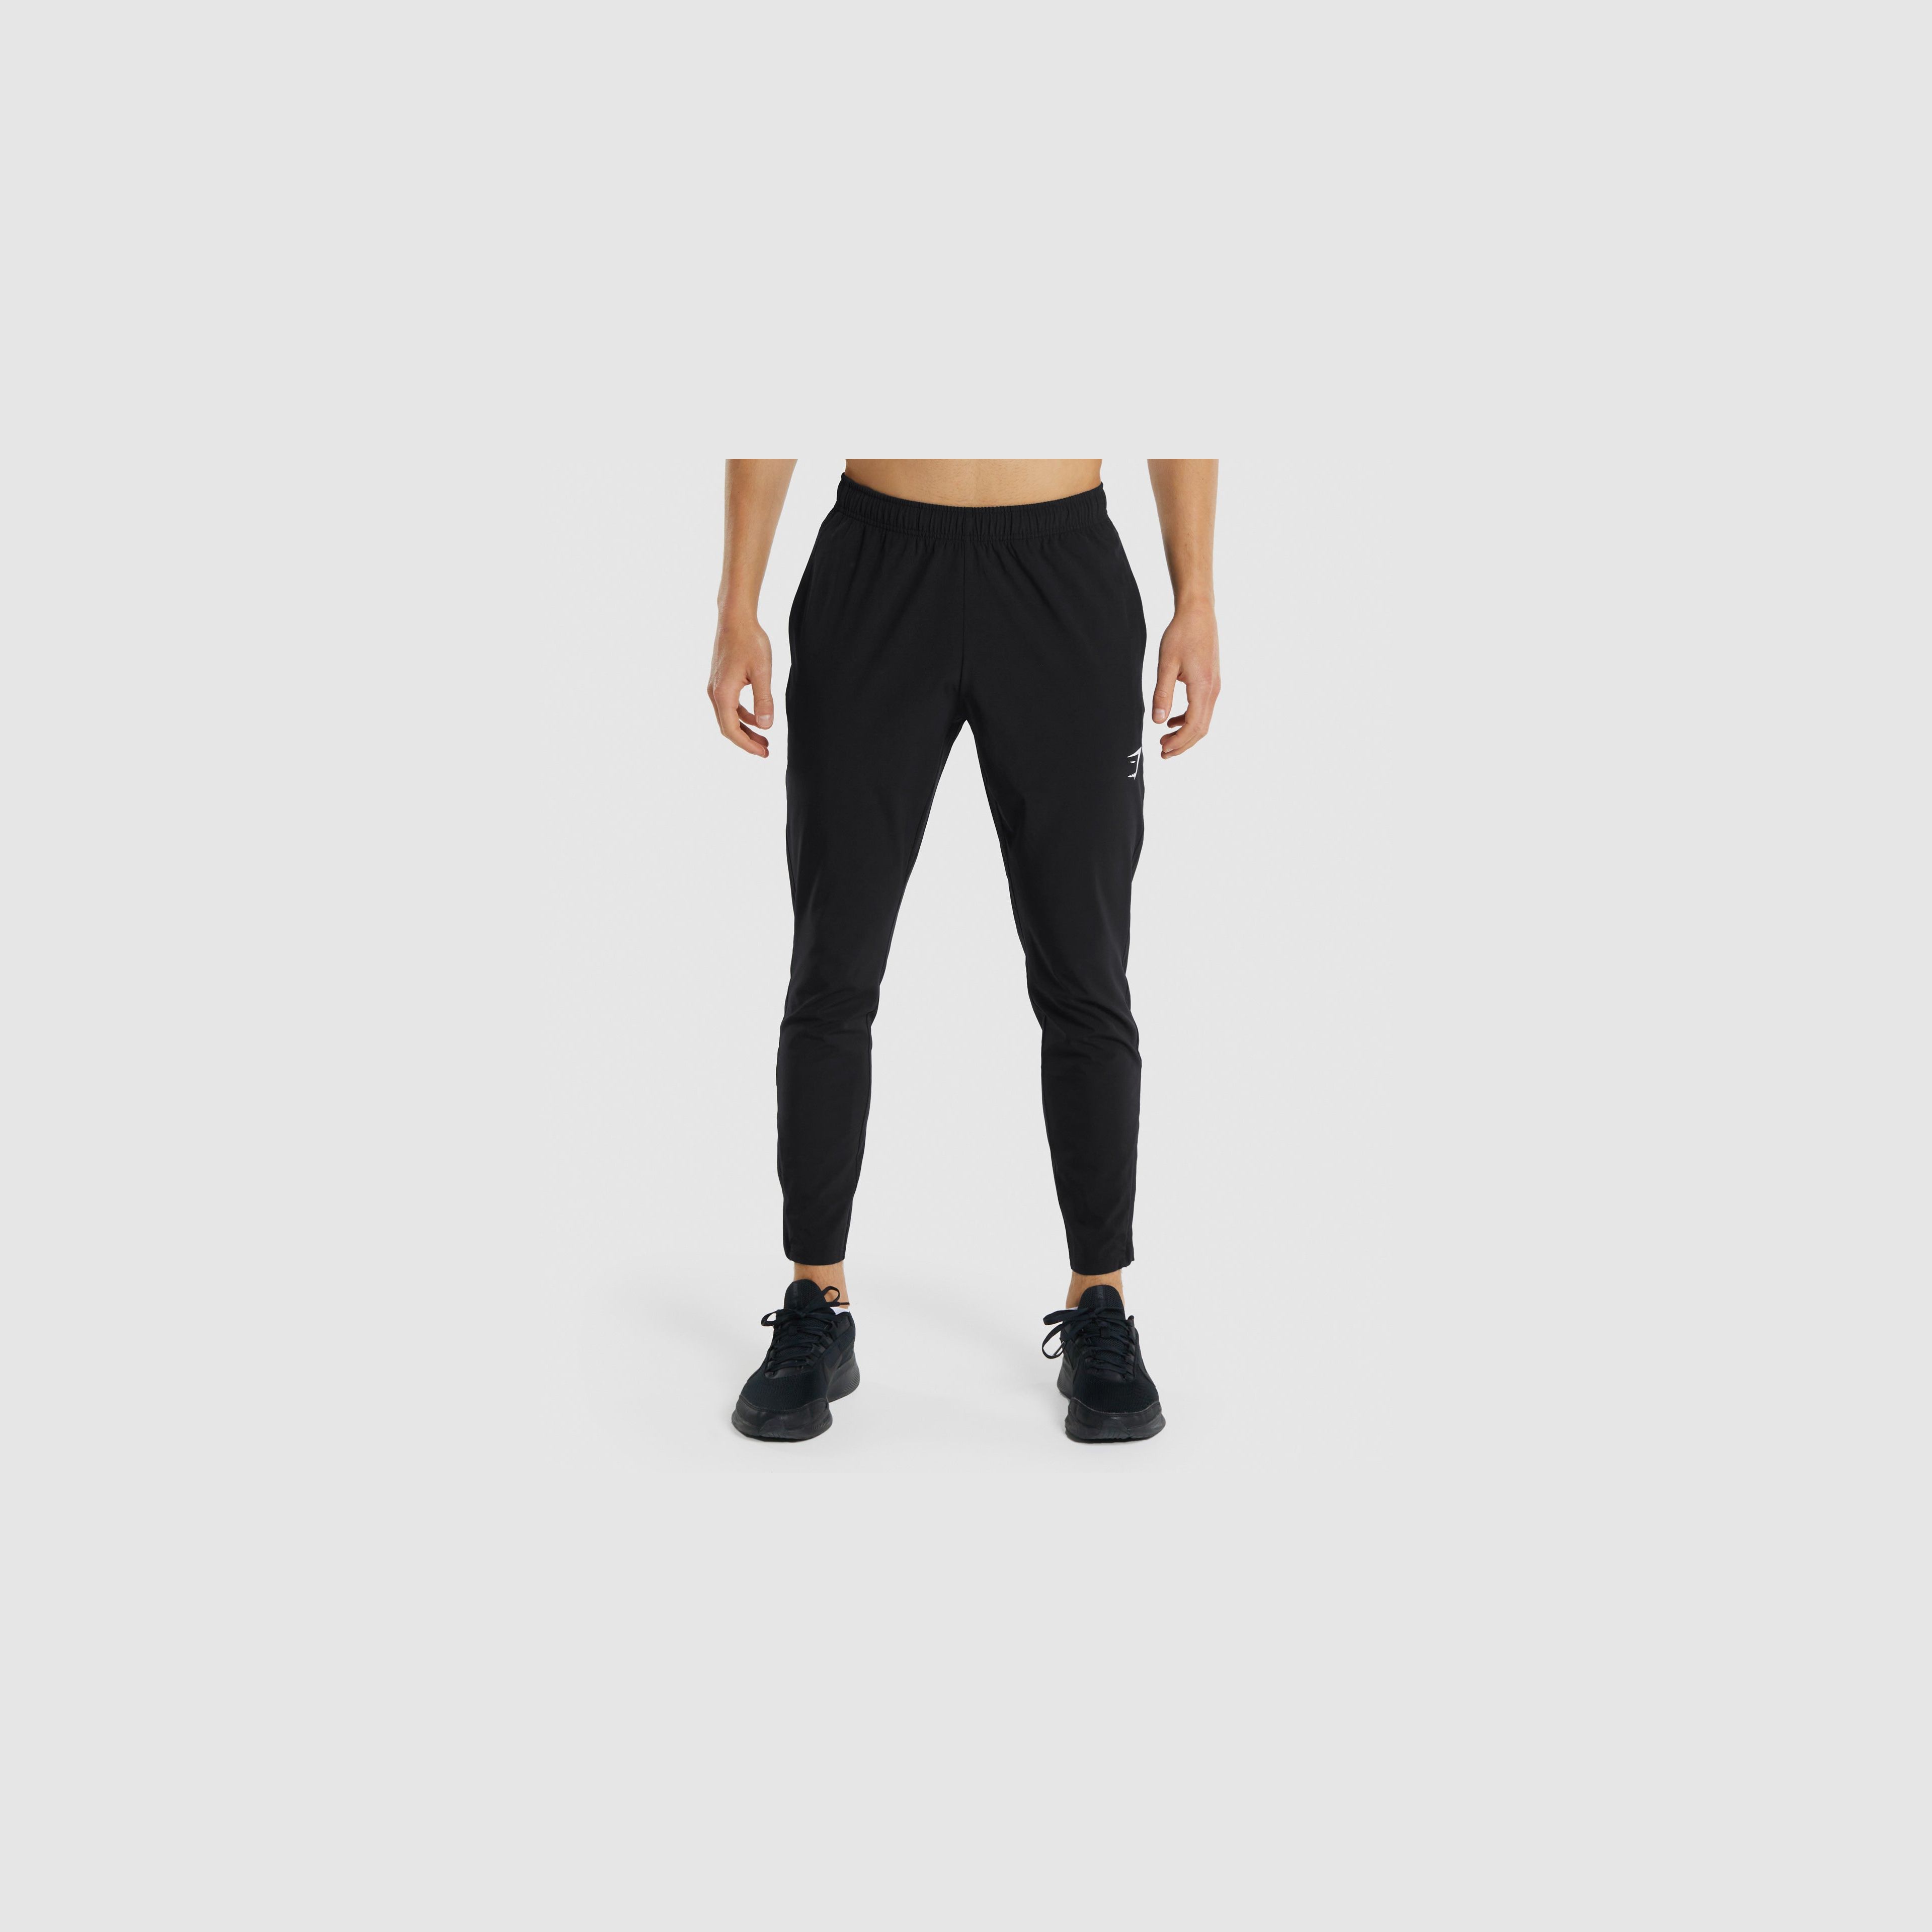 https://cdn.prod.marmalade.co/products/fit-in/3840x3840/filters:quality(80):fill(e6e6e6)/www.gymshark.com%2Fproducts%2Fgymshark-arrival-woven-joggers-black-ss22%2F1644314113%2FARRIVALSLIMWOVENPANT-A1A1X-BBBB-M-AJ3-BLACK.A-Edit_AS_bb5c8f6a-0754-4a2f-b0fe-6e2acc0d60a1.jpg